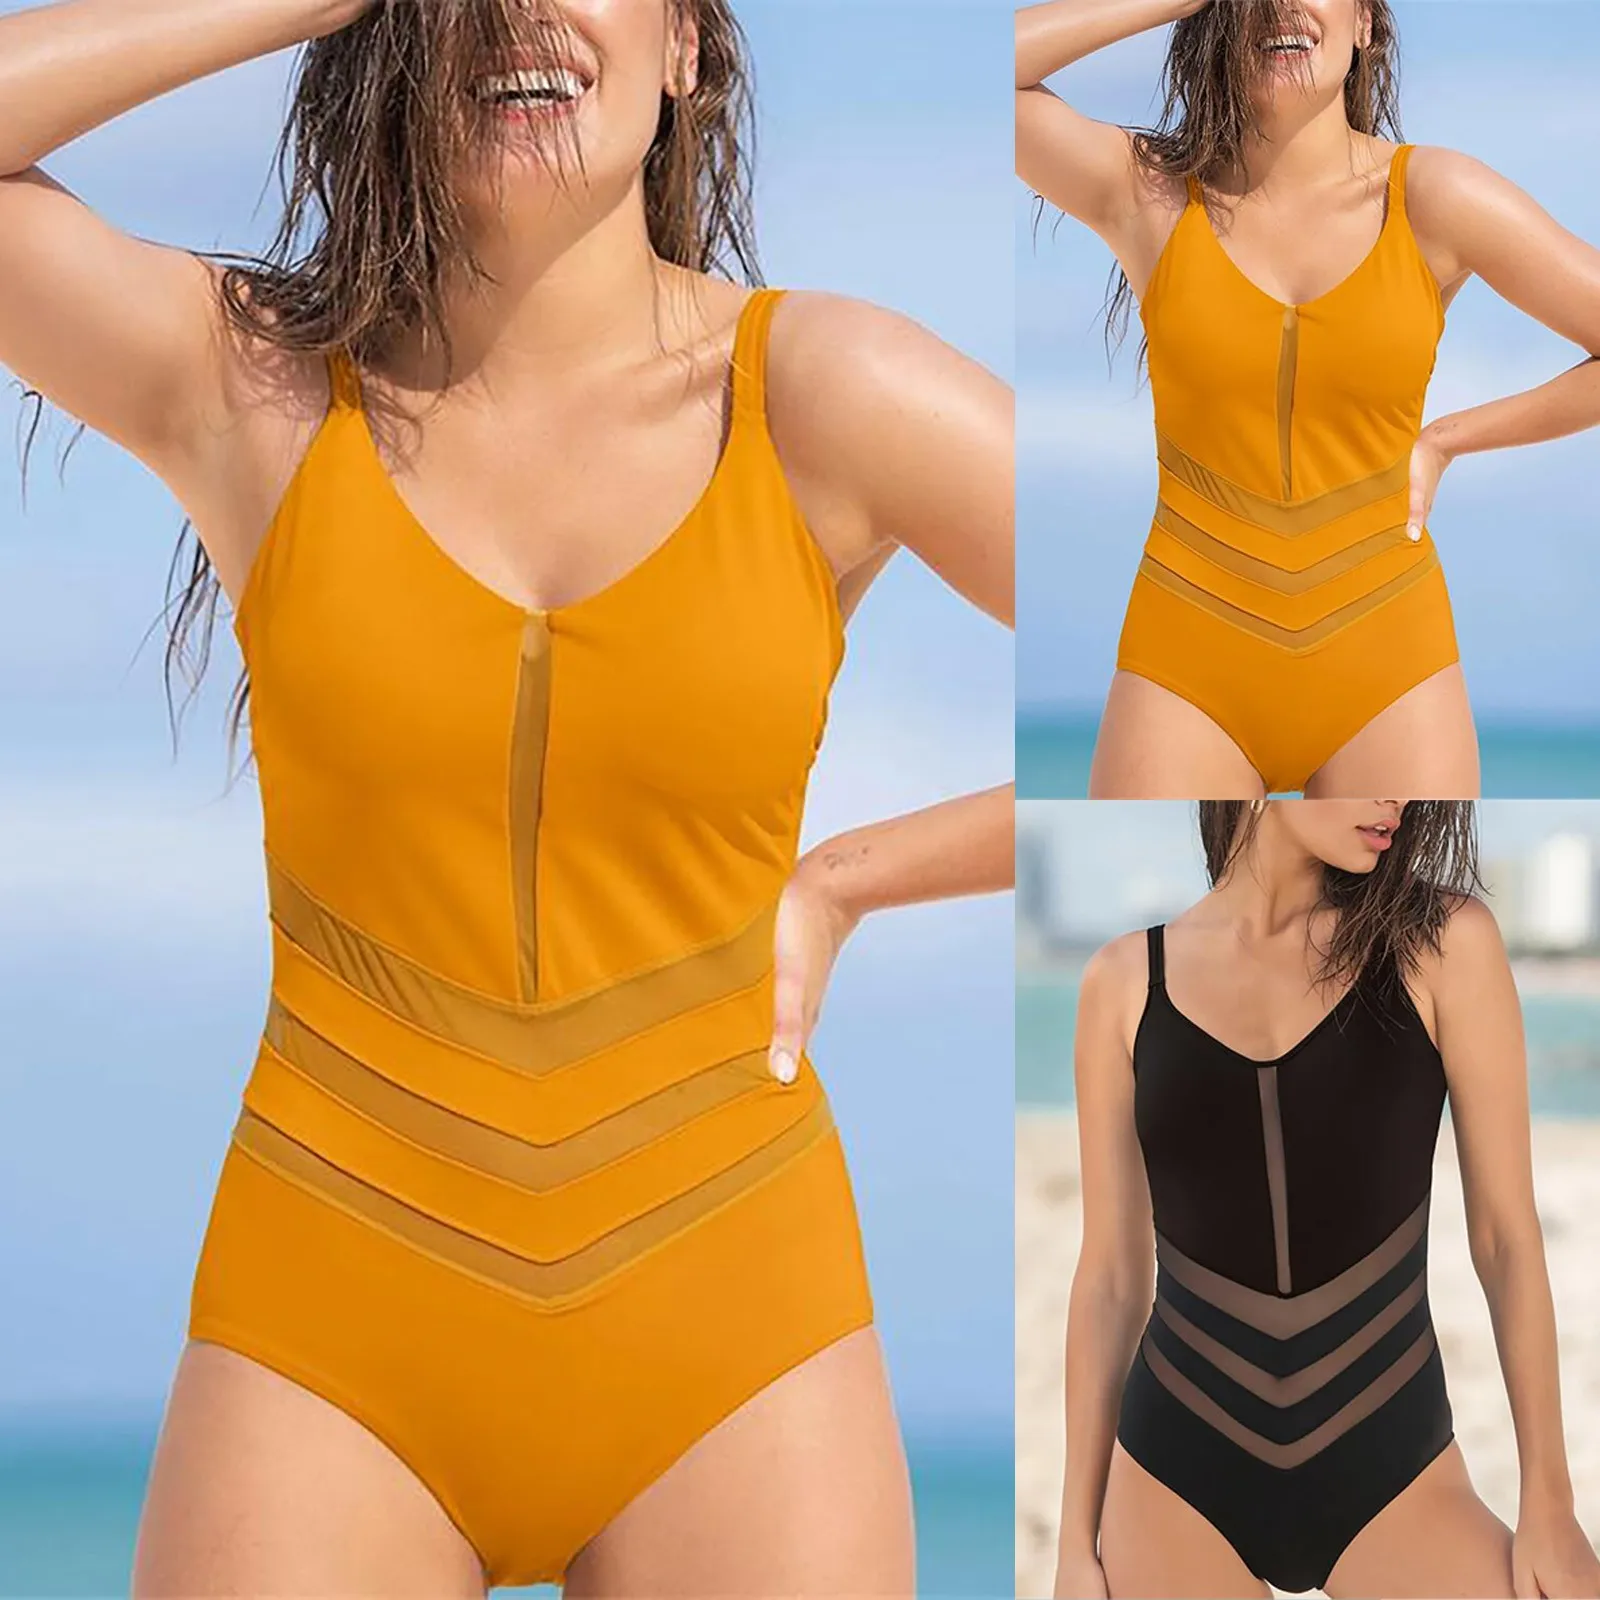 lace bathing suit cover up Sexy High Cut Thong One Piece Swimsuit Women Fashion Sexy Bikini Mesh Splicing Backless One Piece Swimsuit Купальник Женский Beach Robe Cover Up